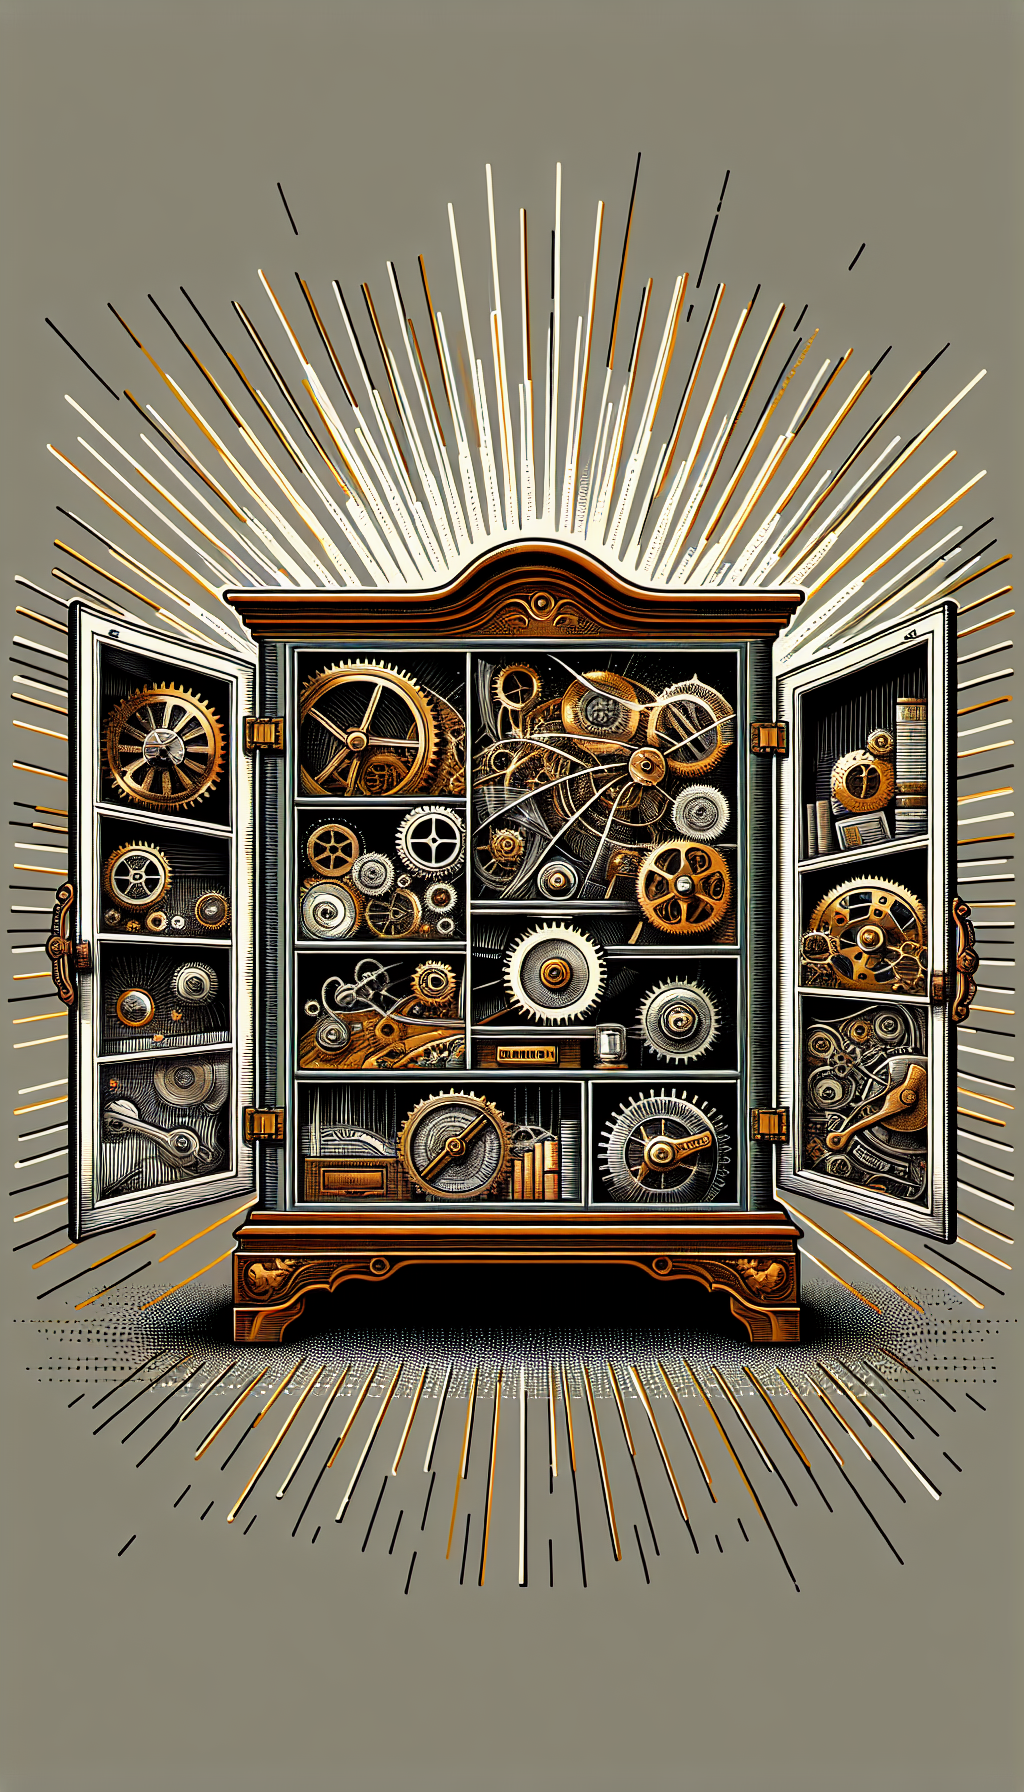 An illustration depicting a grand Hoosier cabinet with transparent sections revealing different factors like rarity, condition, and history as whimsical gears and cogs inside it, with rays of light (indicating value) shining out from the cabinet. The styles of the gears range from steampunk to art deco, symbolizing the diverse influences on the cabinet's value.